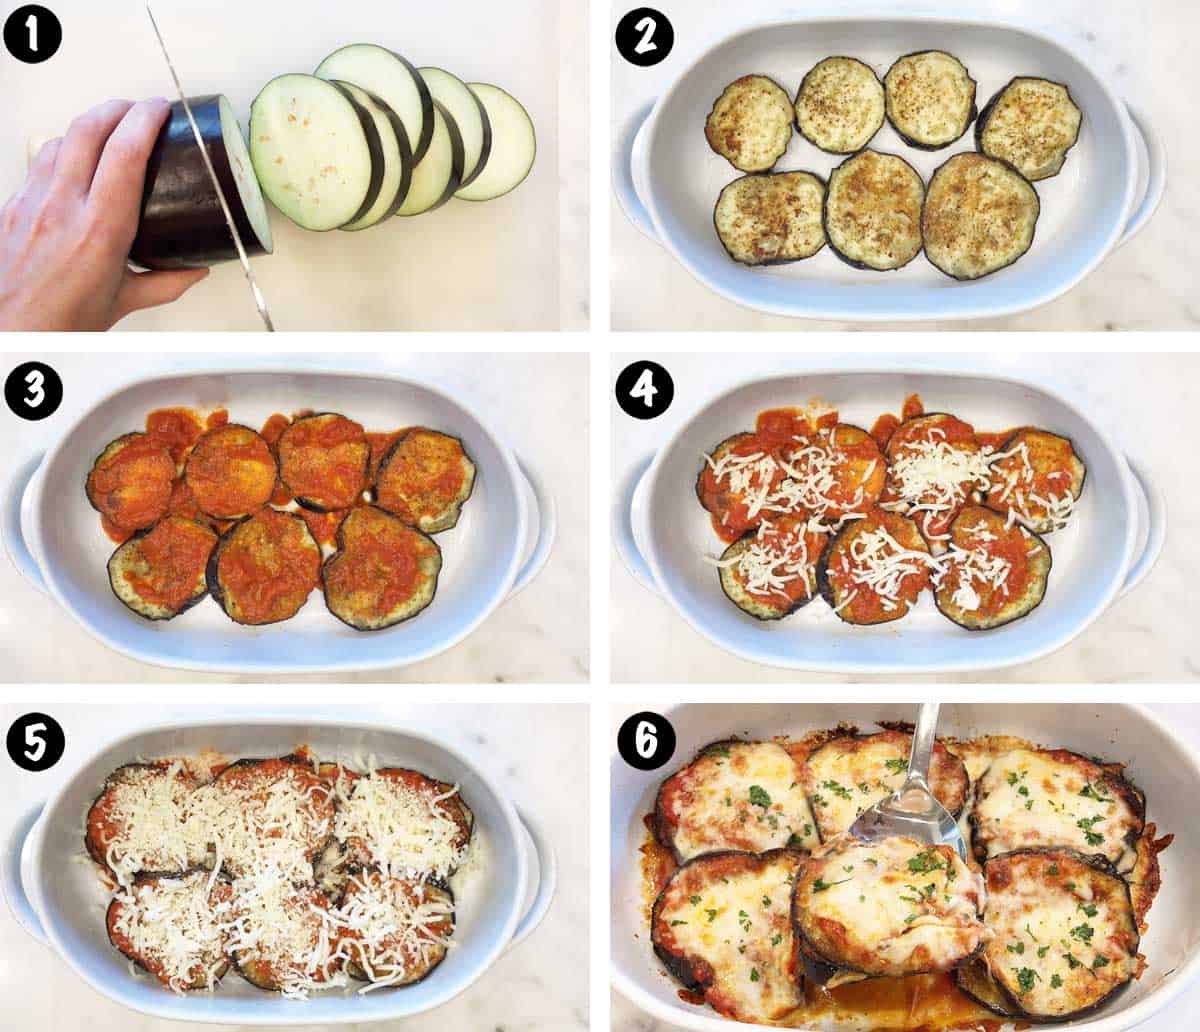 A photo collage showing the steps for making an eggplant casserole.